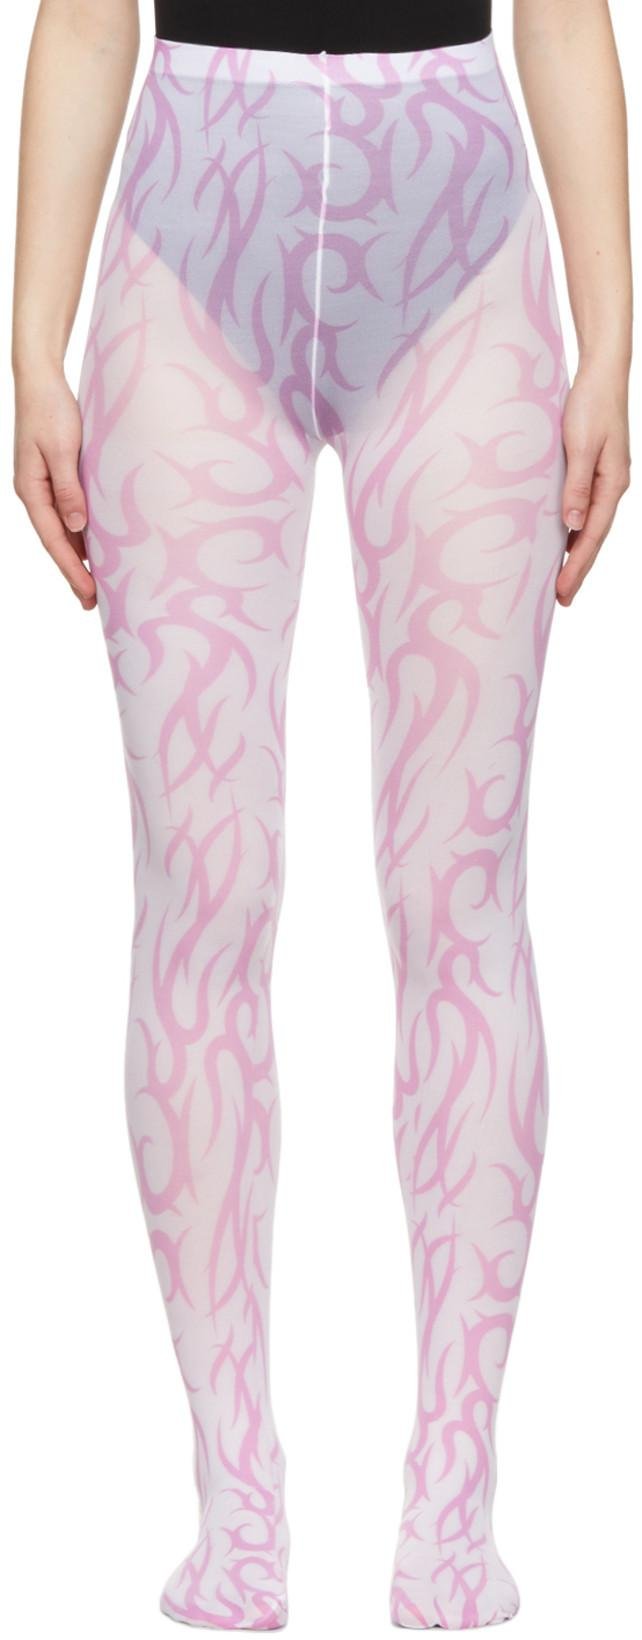 Pink & White All Over Tattoo Print Tights by ASHLEY WILLIAMS